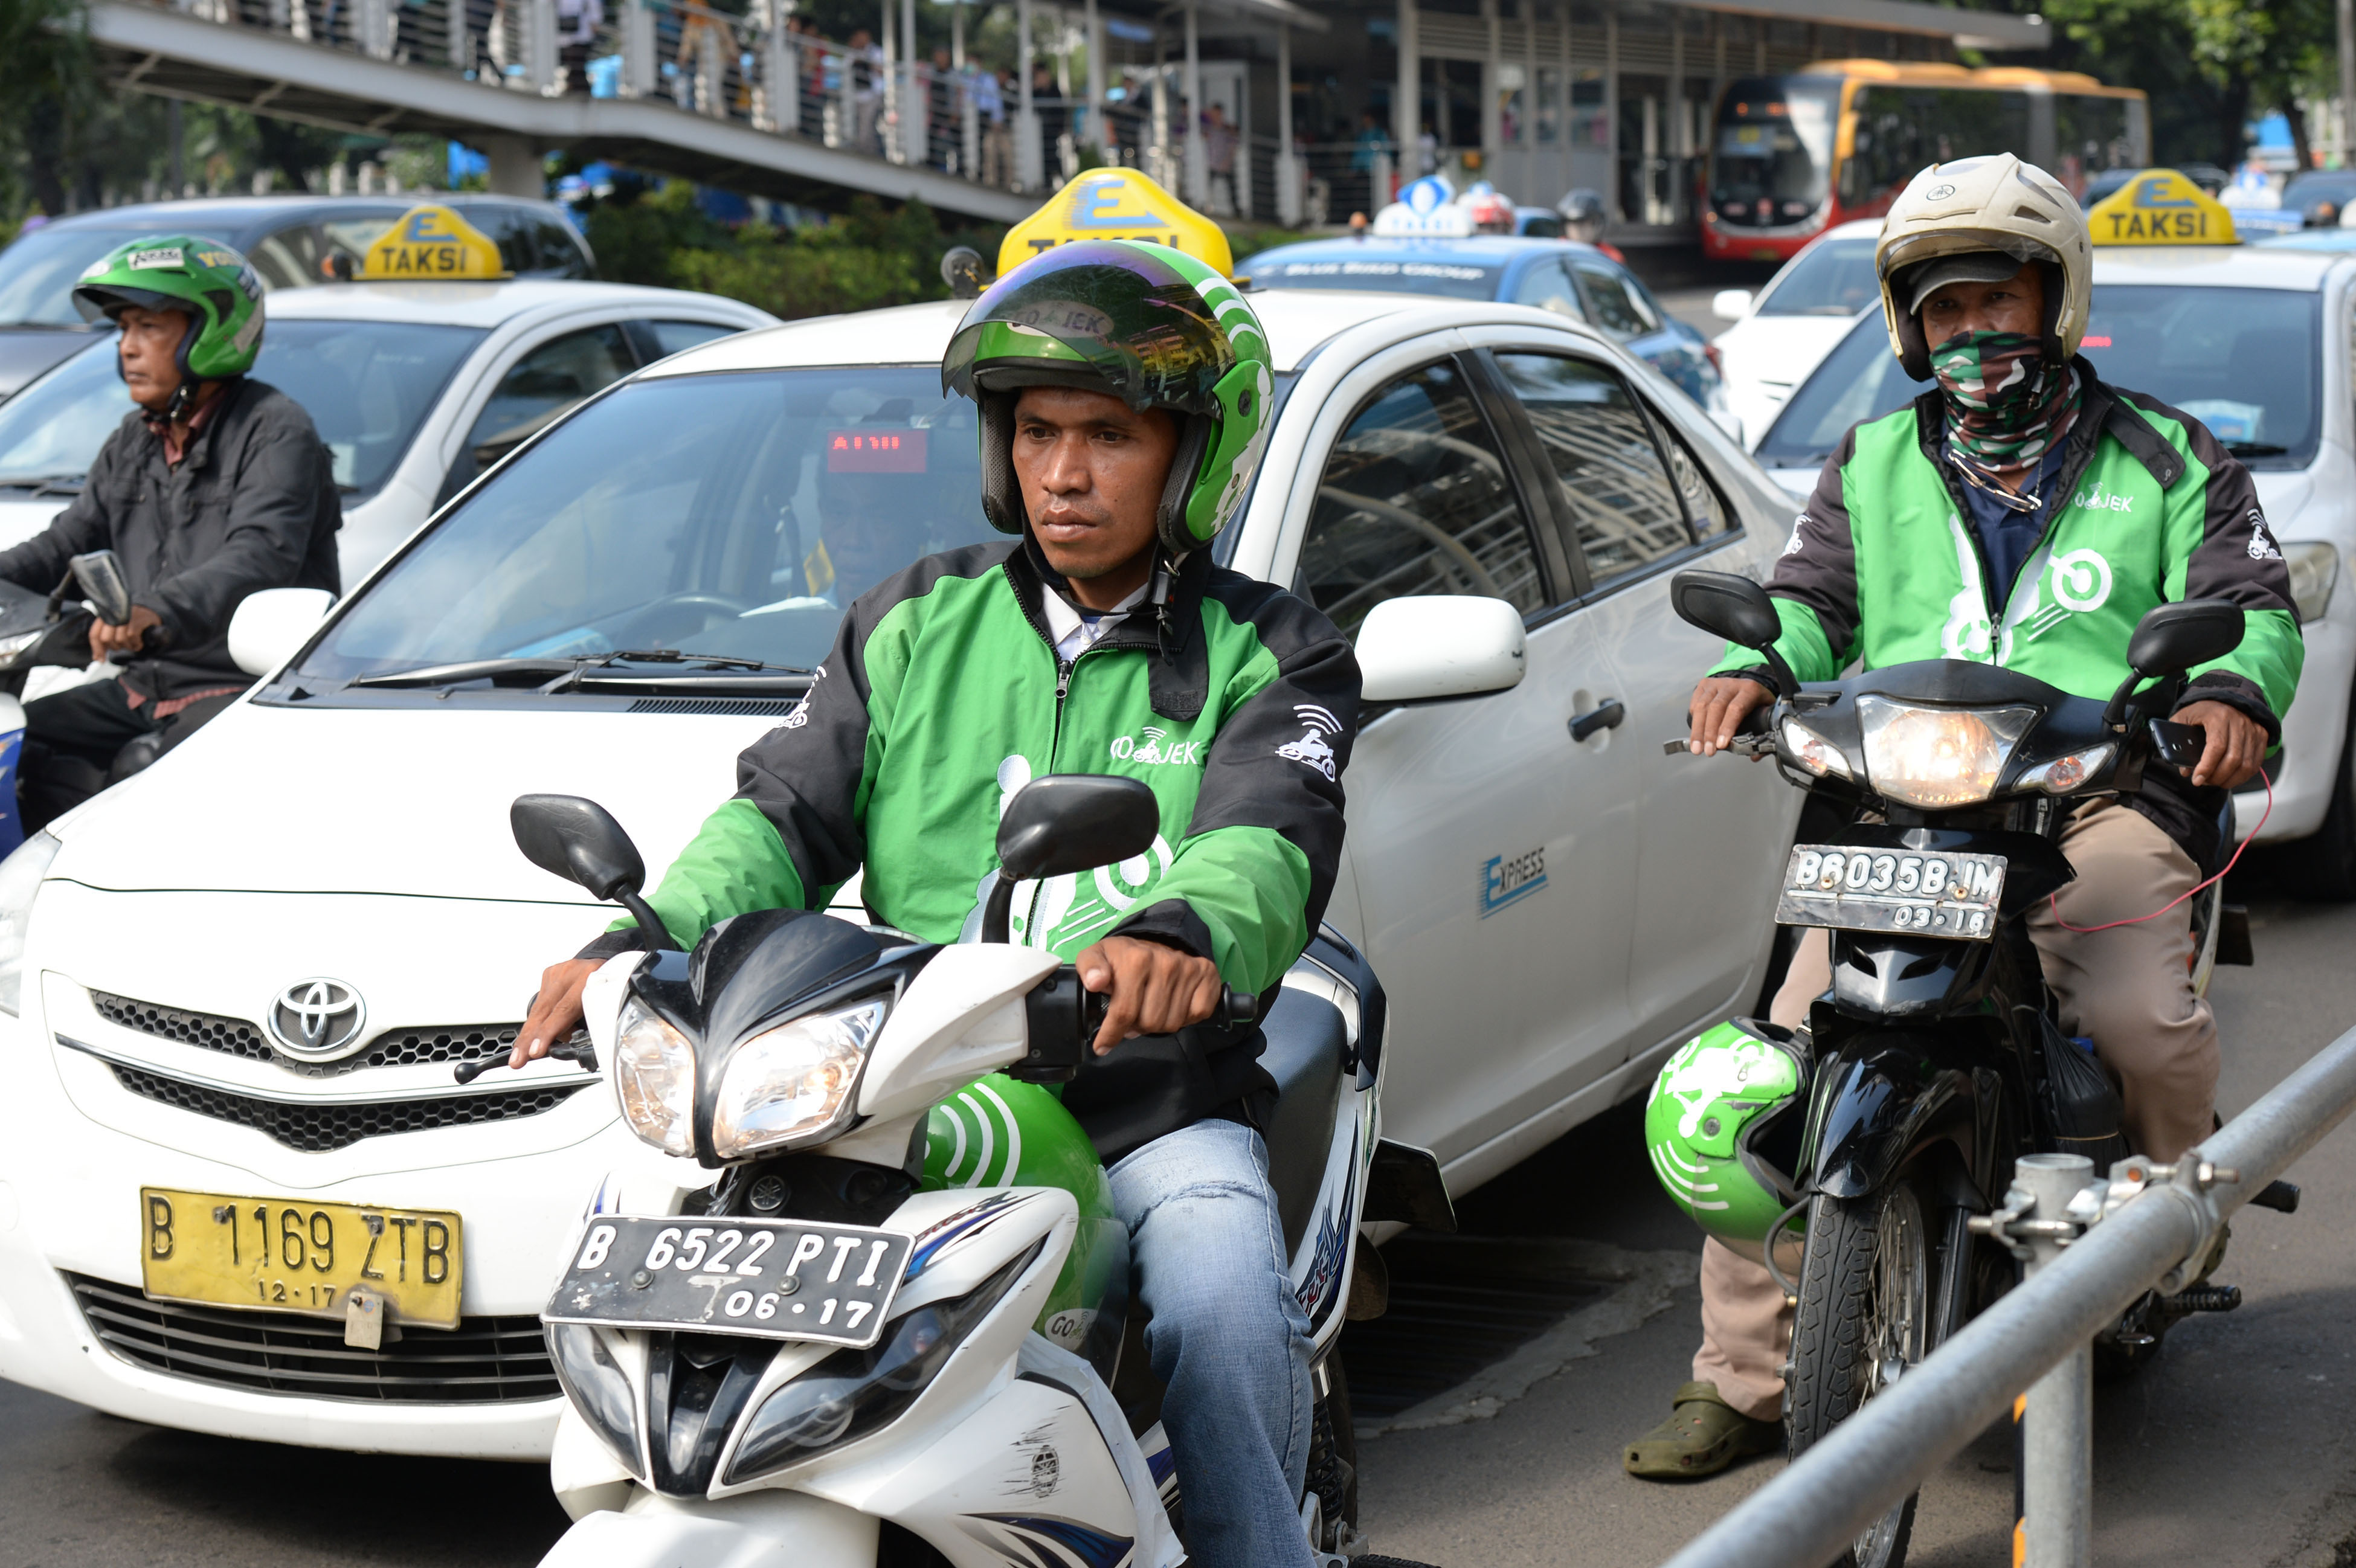 Go-Jek buys three startups to advance its mobile payment business